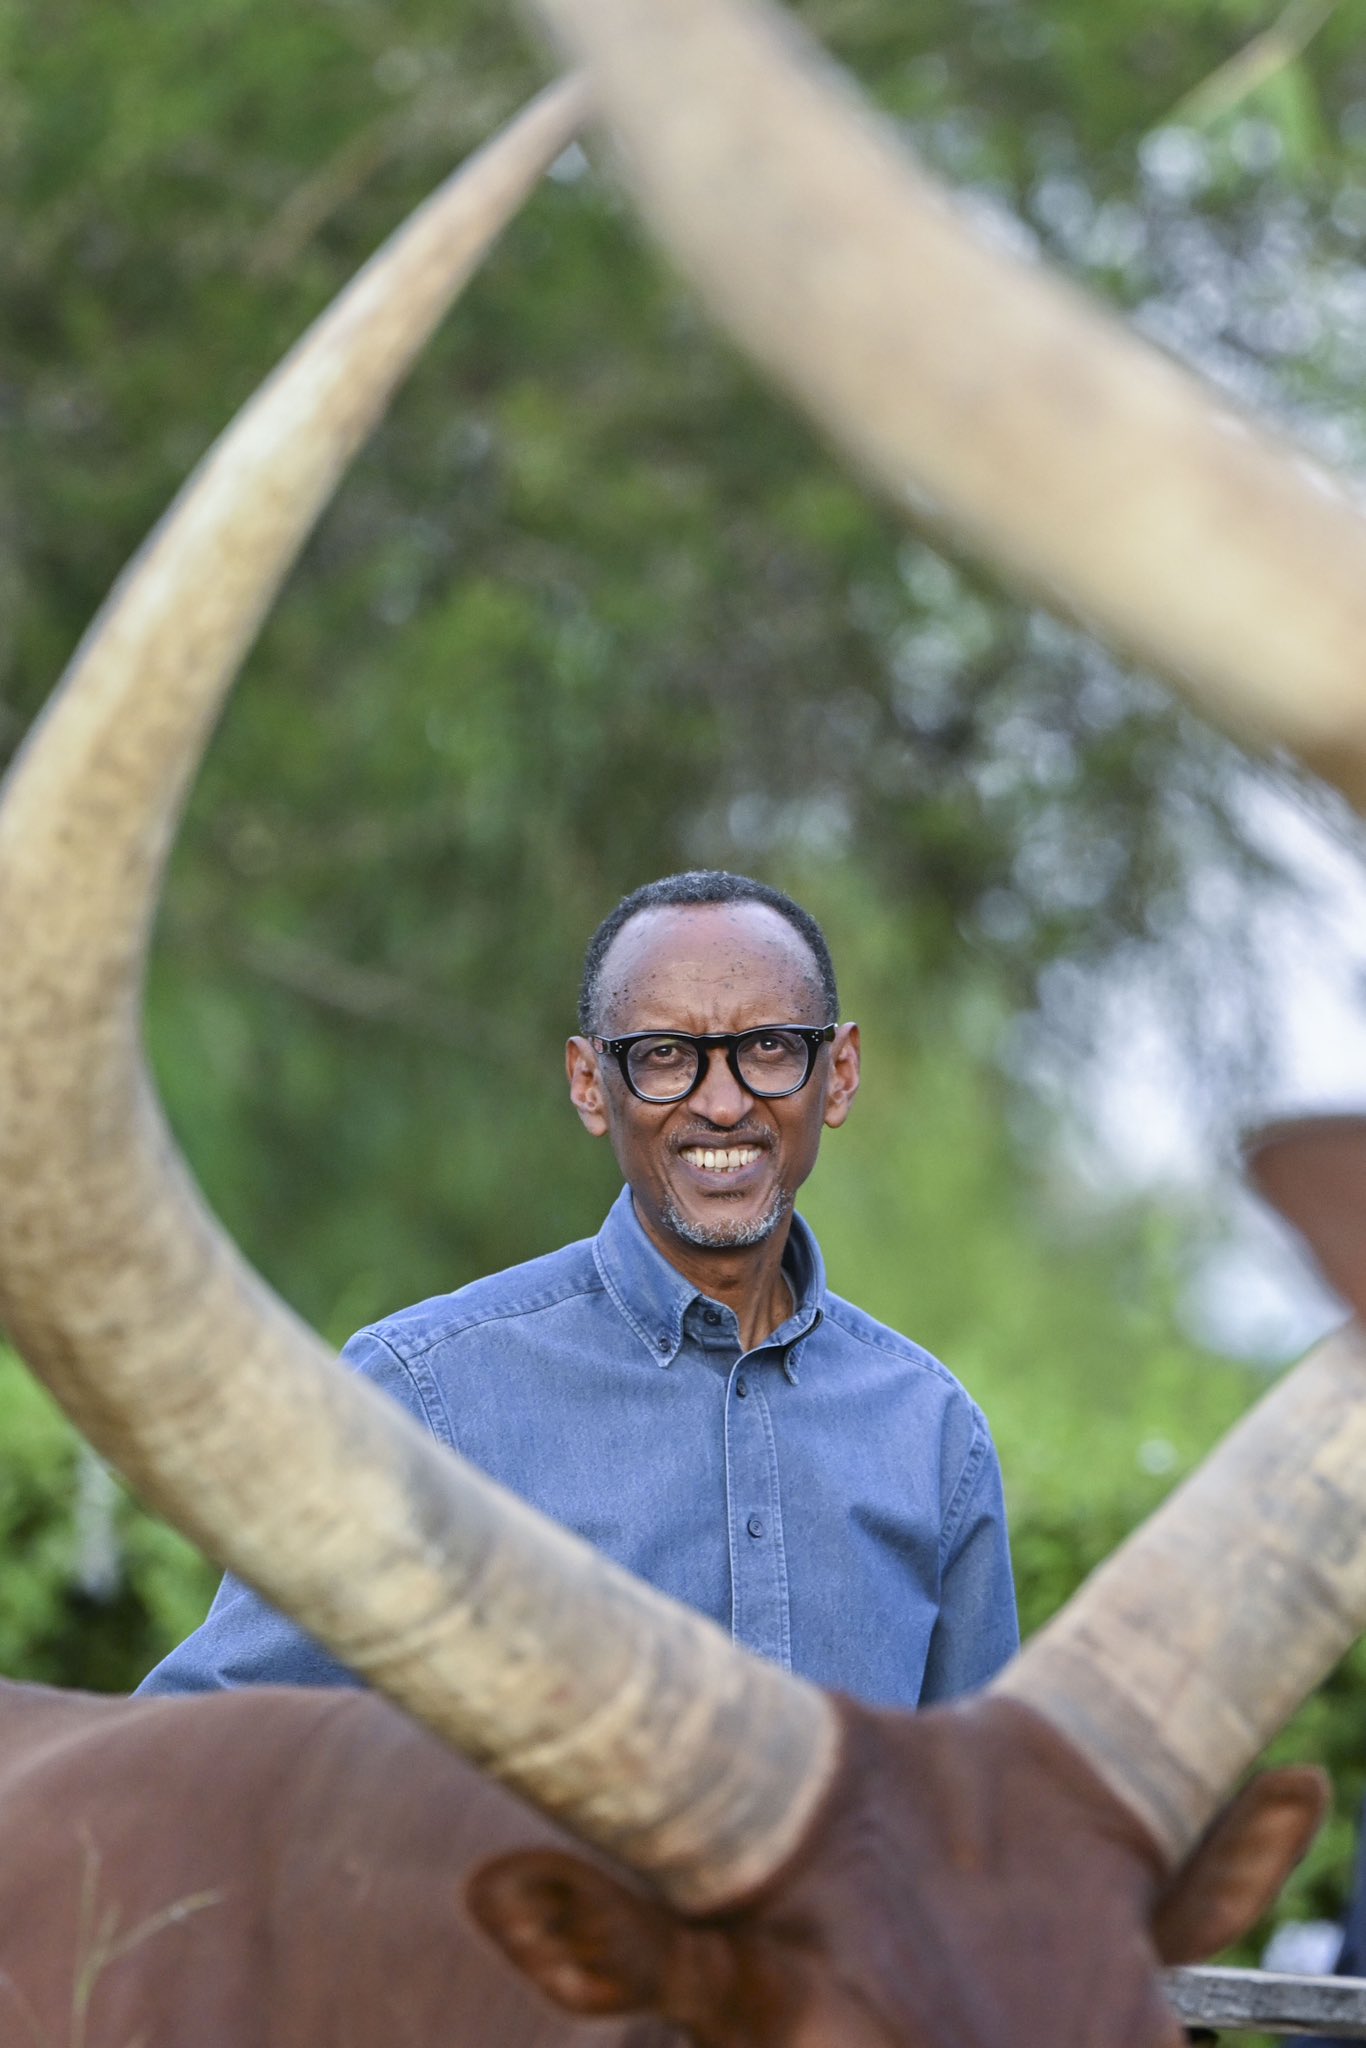 Happy birthday Mzee president Paul Kagame !! We love you. Long live    